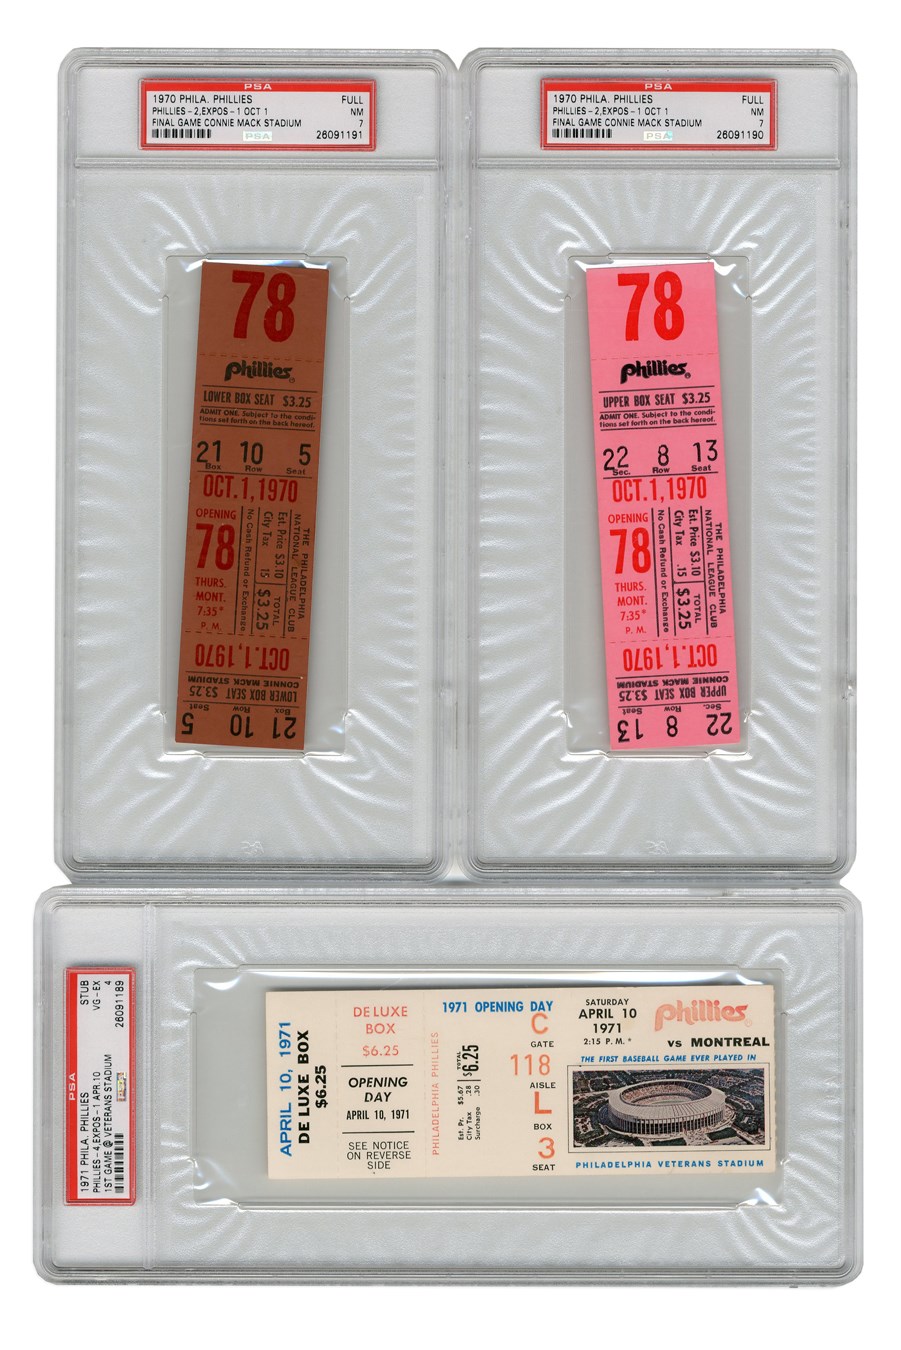 Tickets, Publications & Pins - High Grade 1970 & 1971 First & Last Games at Connie Mack & Veterans Stadiums Full Tickets PSA/DNA 7 (3 pieces)